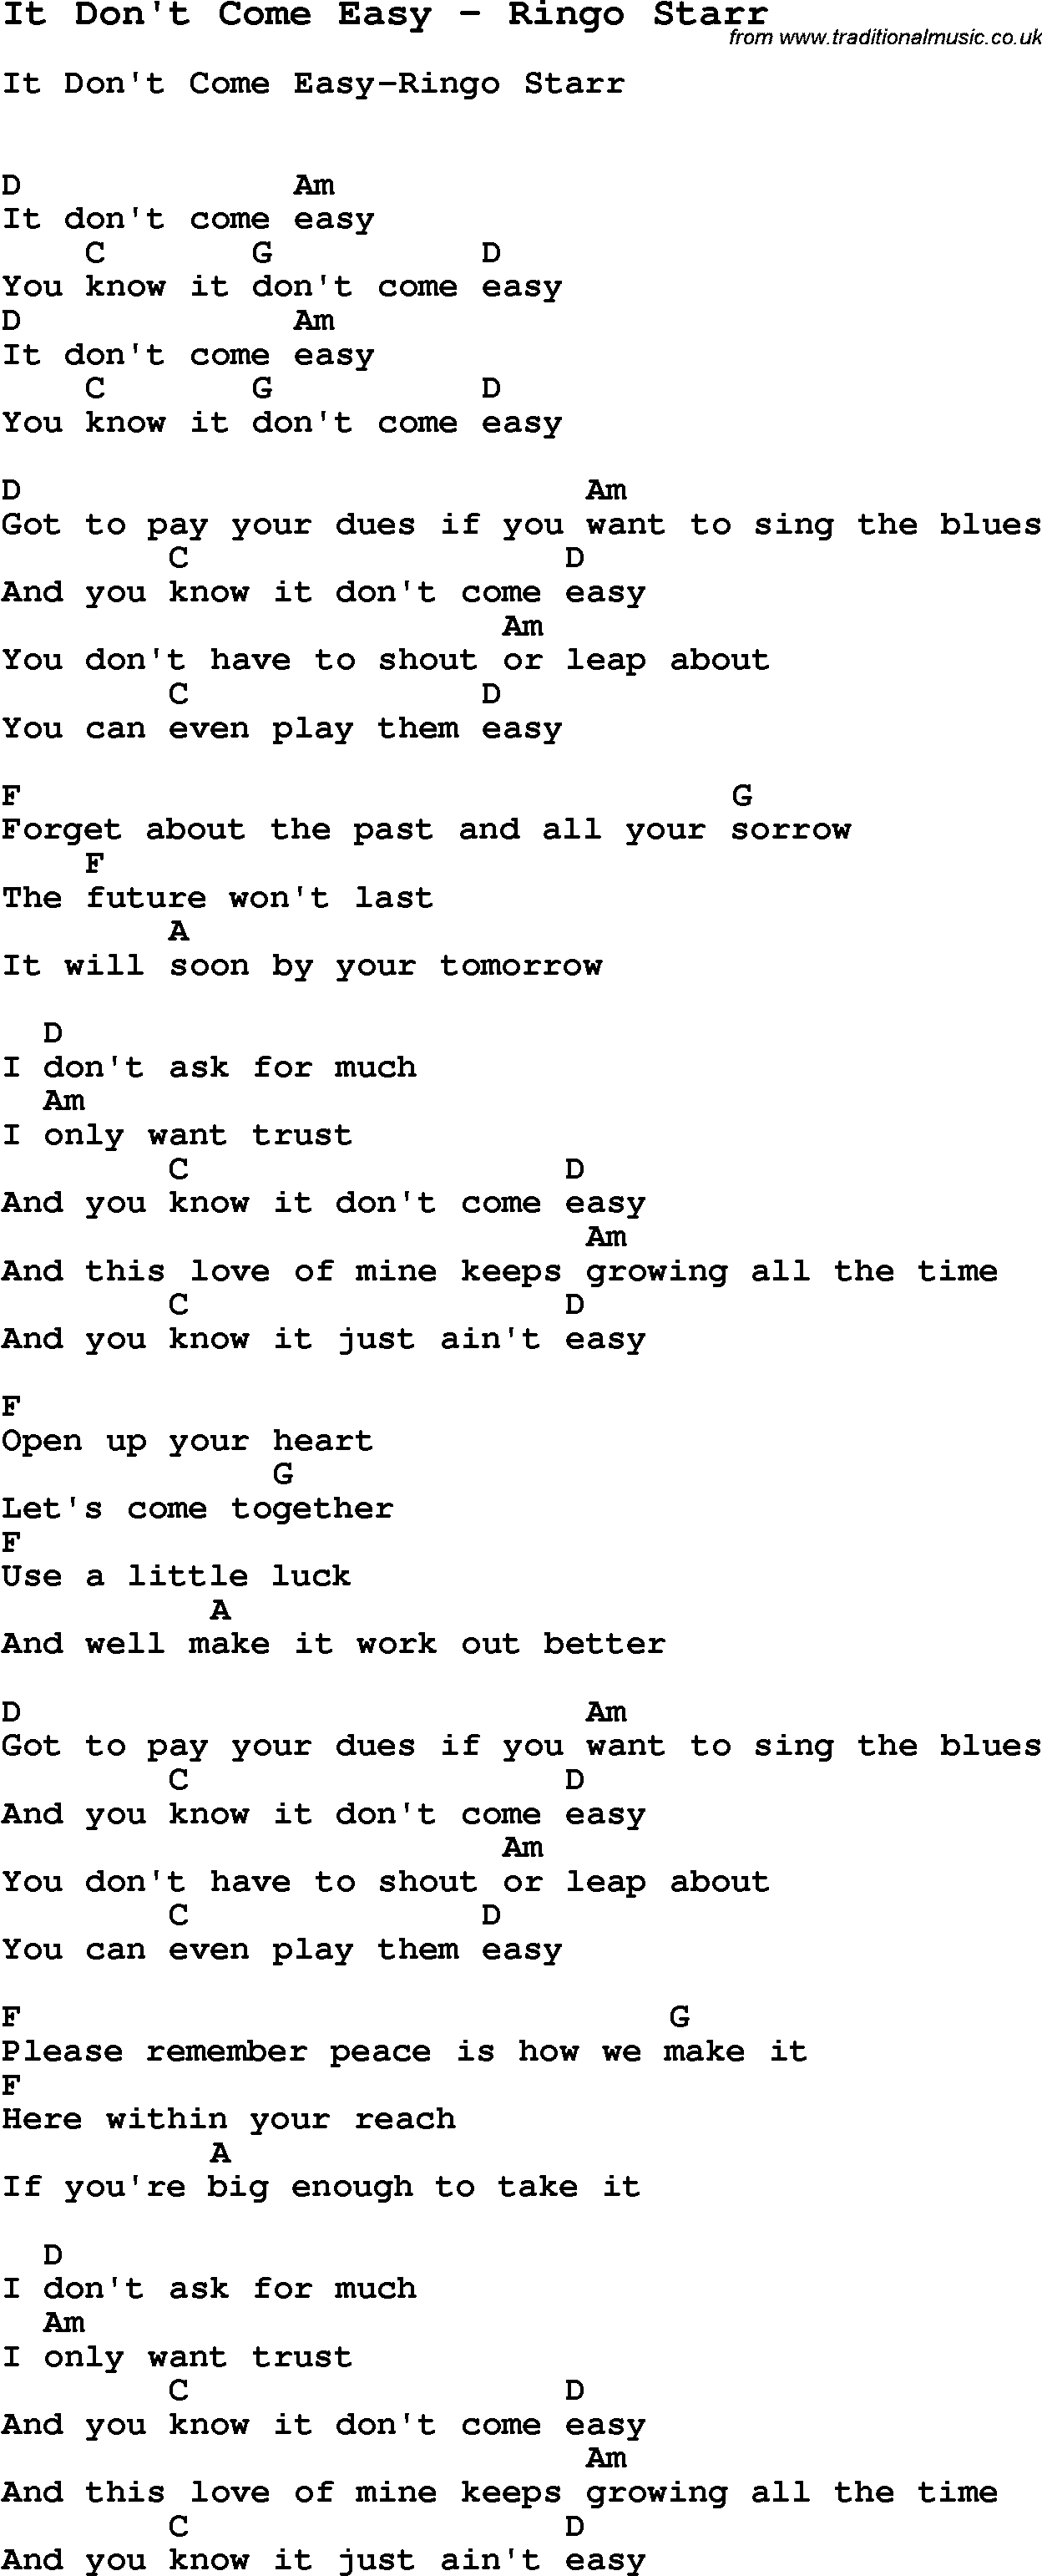 Song It Don't Come Easy by Ringo Starr, with lyrics for vocal performance and accompaniment chords for Ukulele, Guitar Banjo etc.